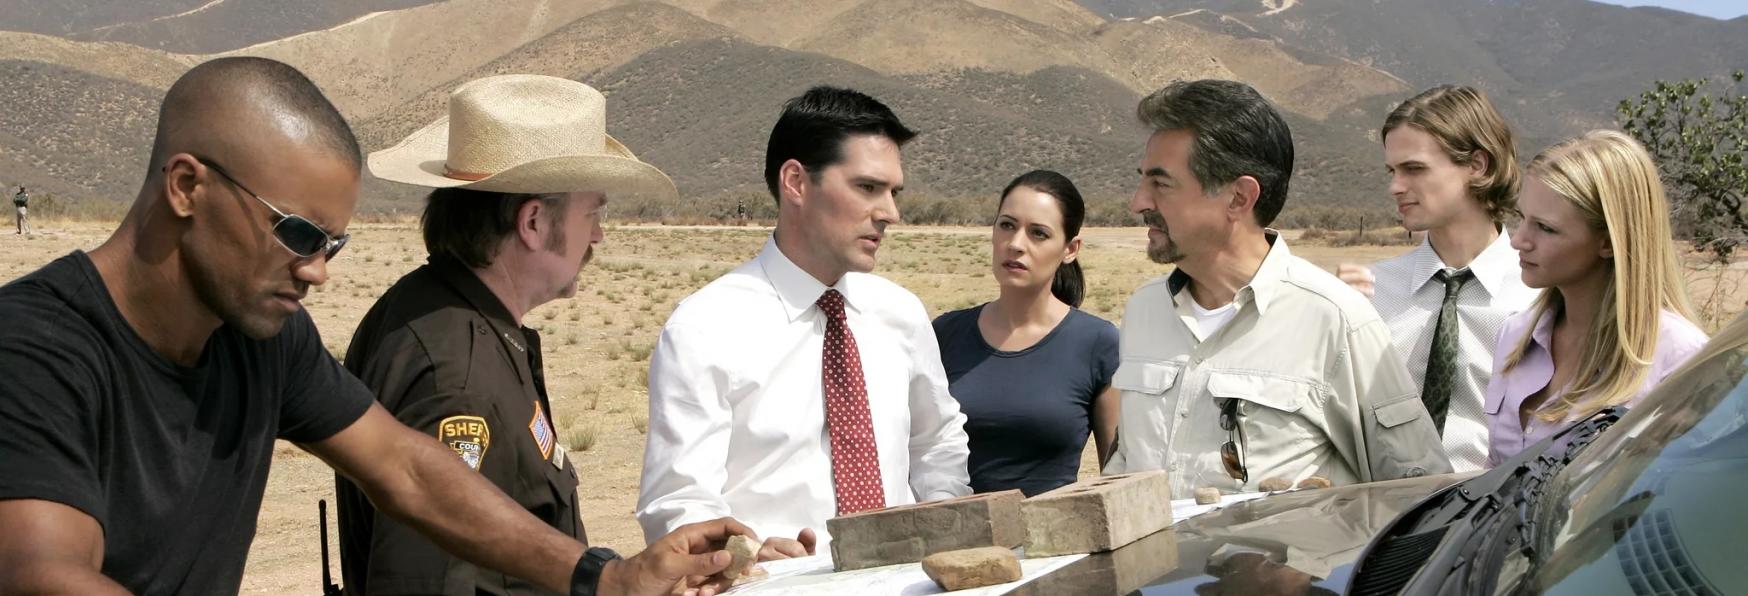 Criminal Minds: Evolution 2 will be there!  Paramount+ has renewed the TV series Revival